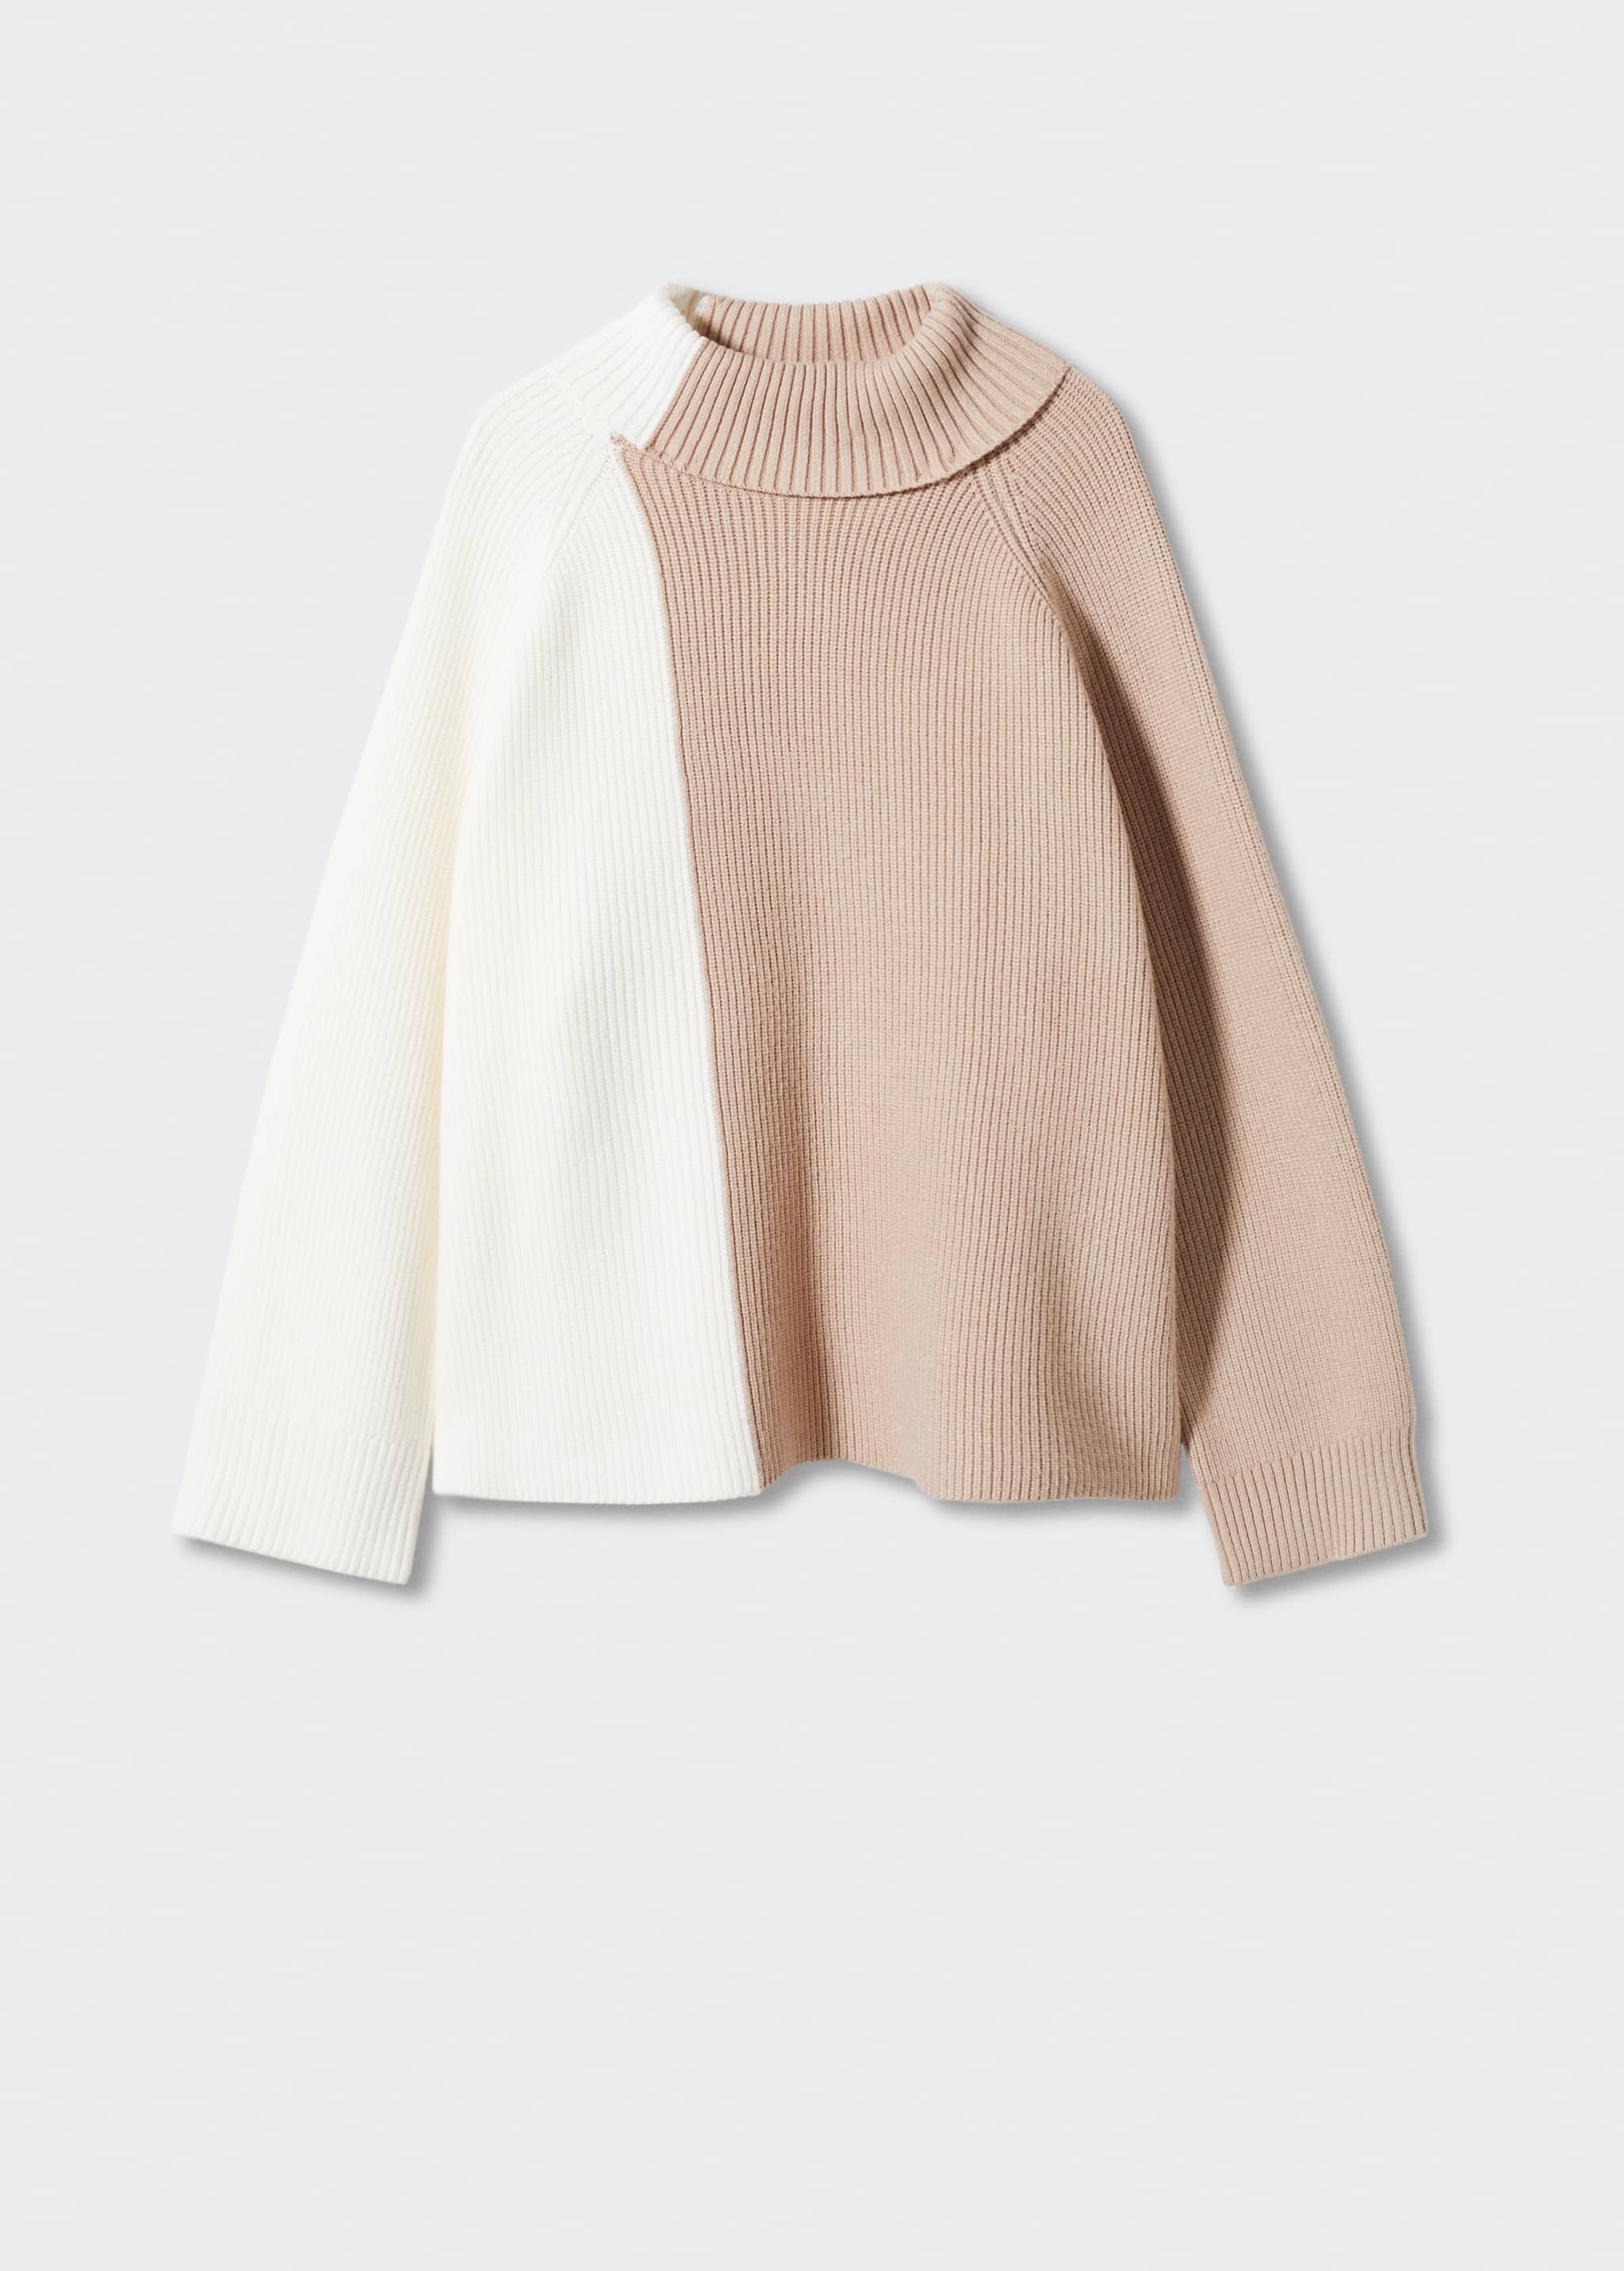 Two-tone turtleneck sweater - Article without model